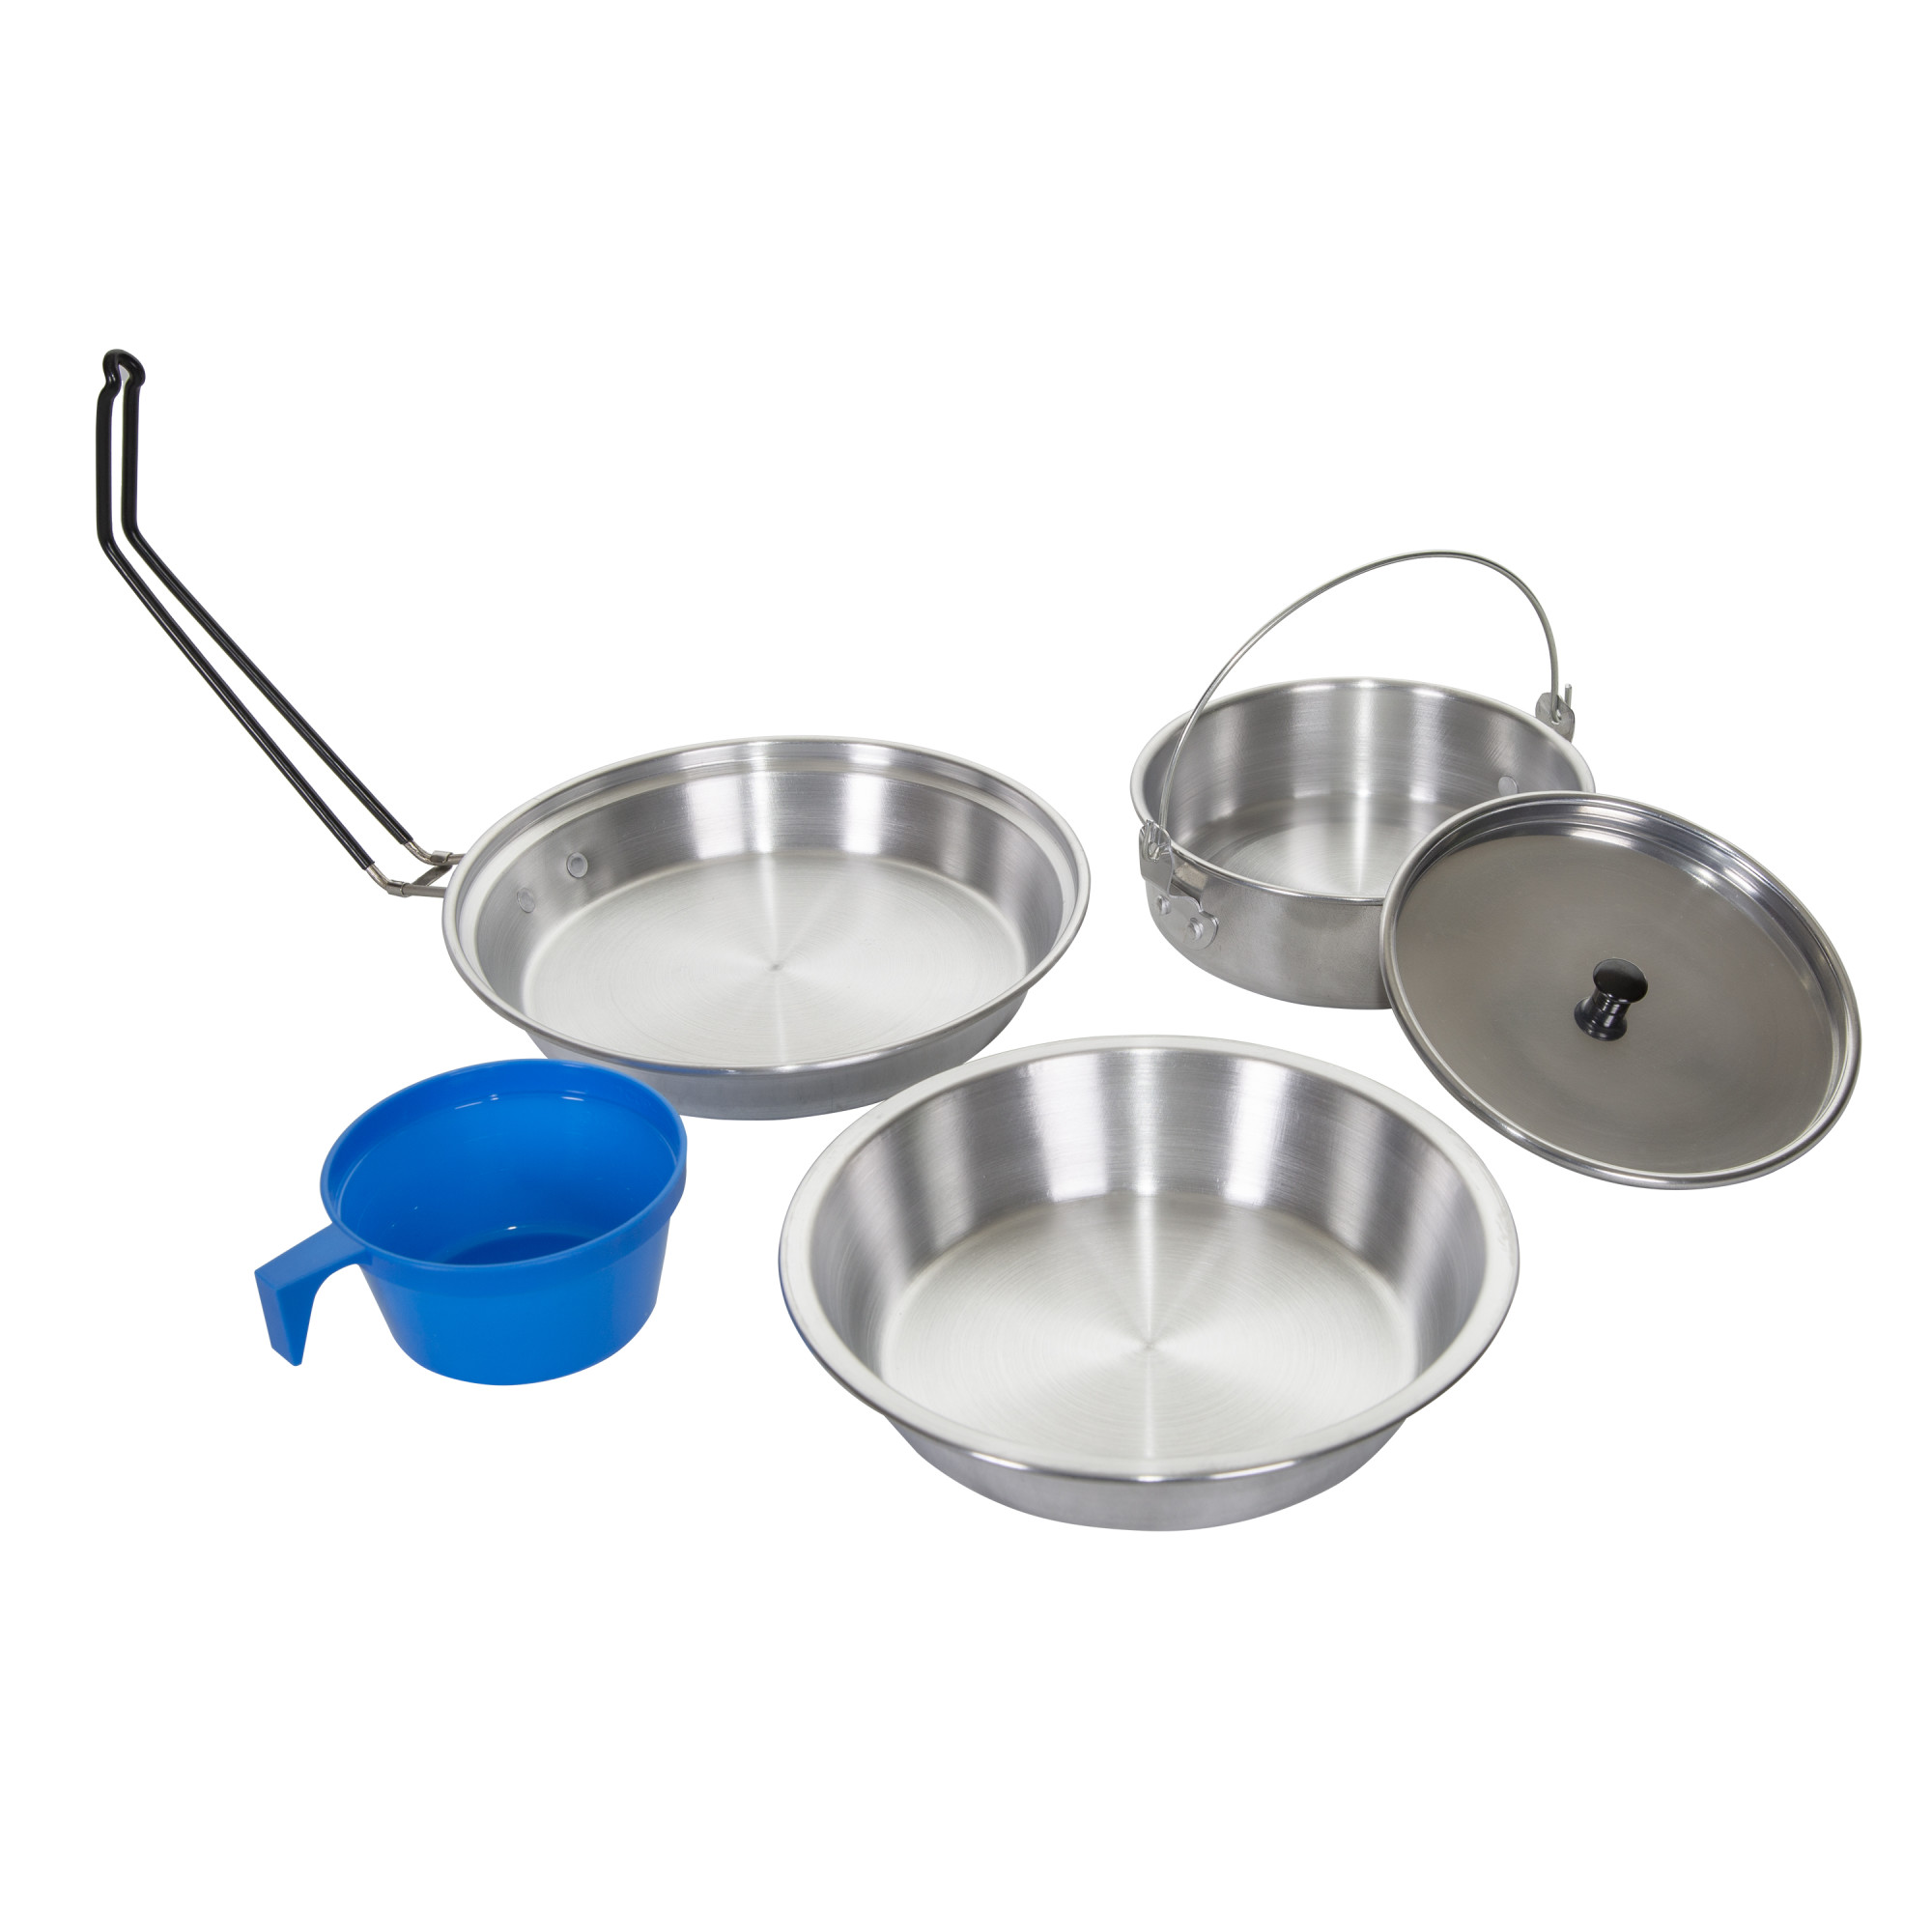 Stansport 1 Piece Aluminum Camping Mess Kit - image 1 of 10